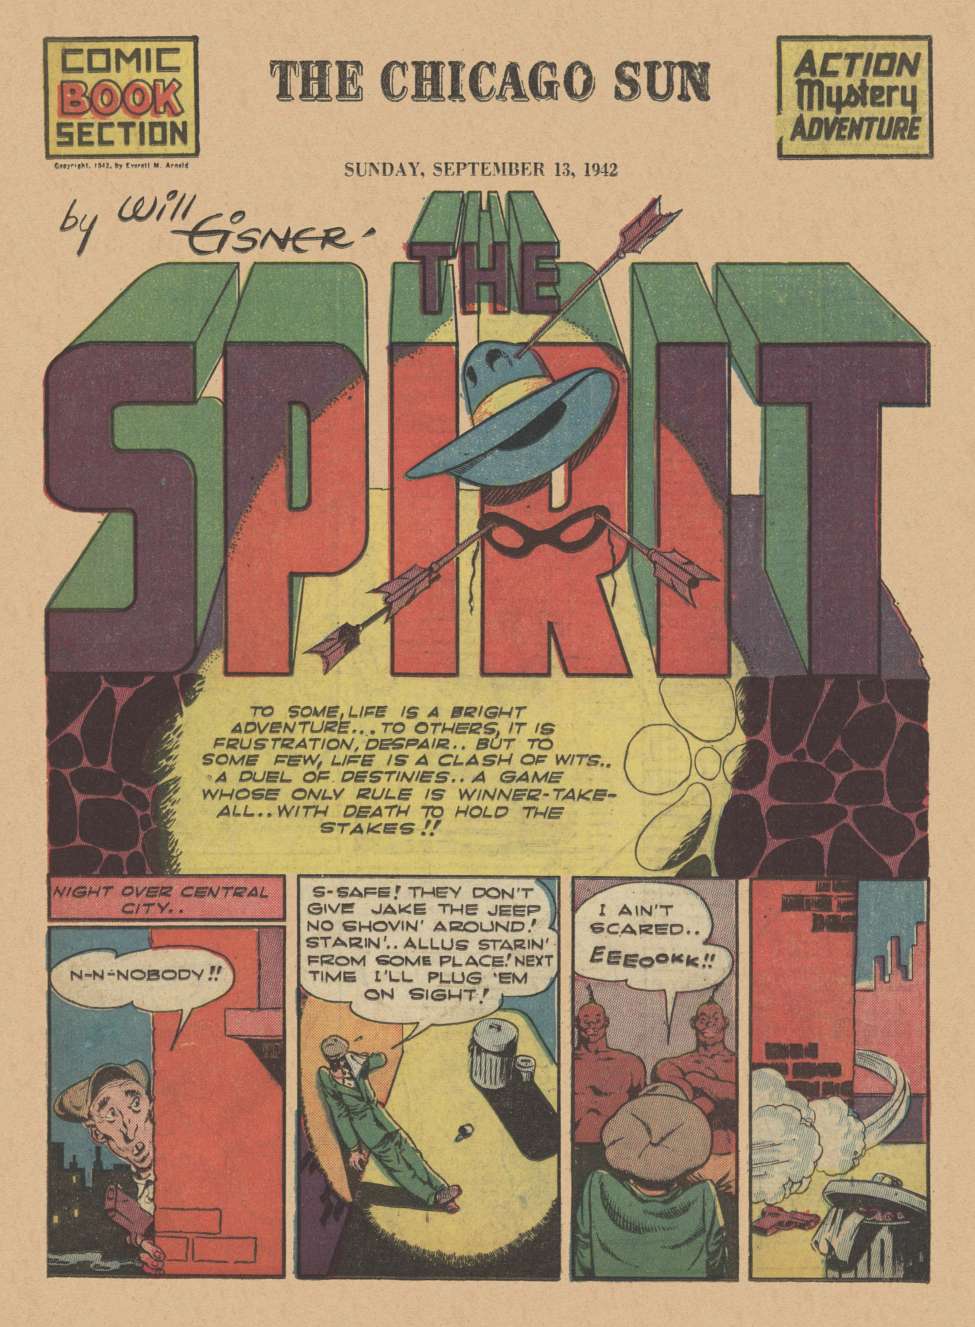 Comic Book Cover For The Spirit (1942-09-13) - Chicago Sun